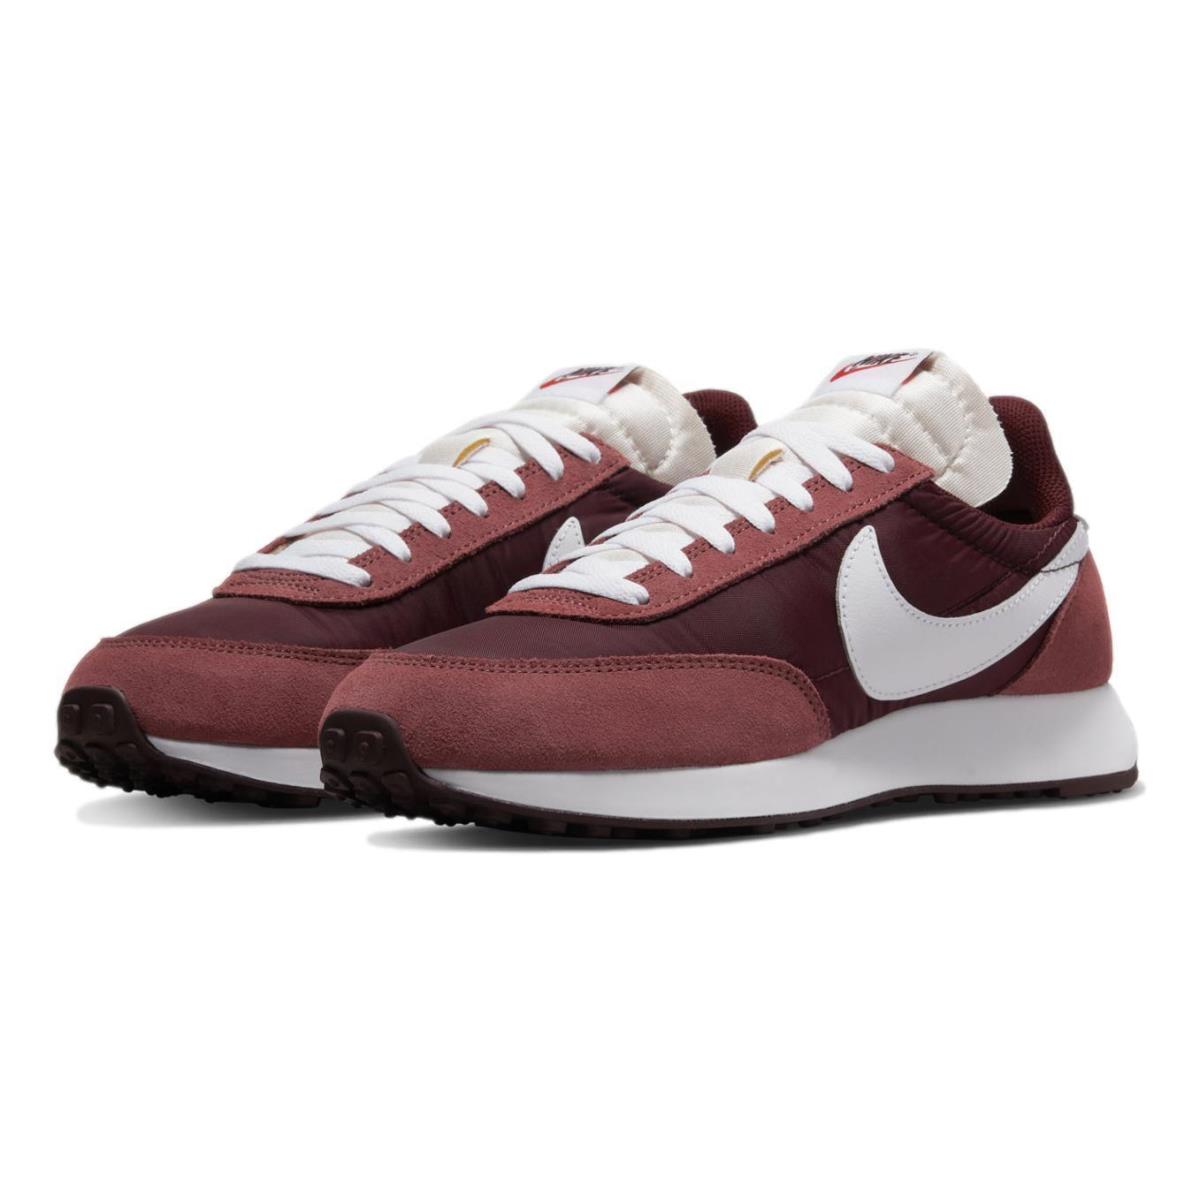 Nike Air Tailwind 79 `mystic Dates` Men`s Shoes Sneakers 487754-603 - Mystic Dates/White/Claystone Red-Sail